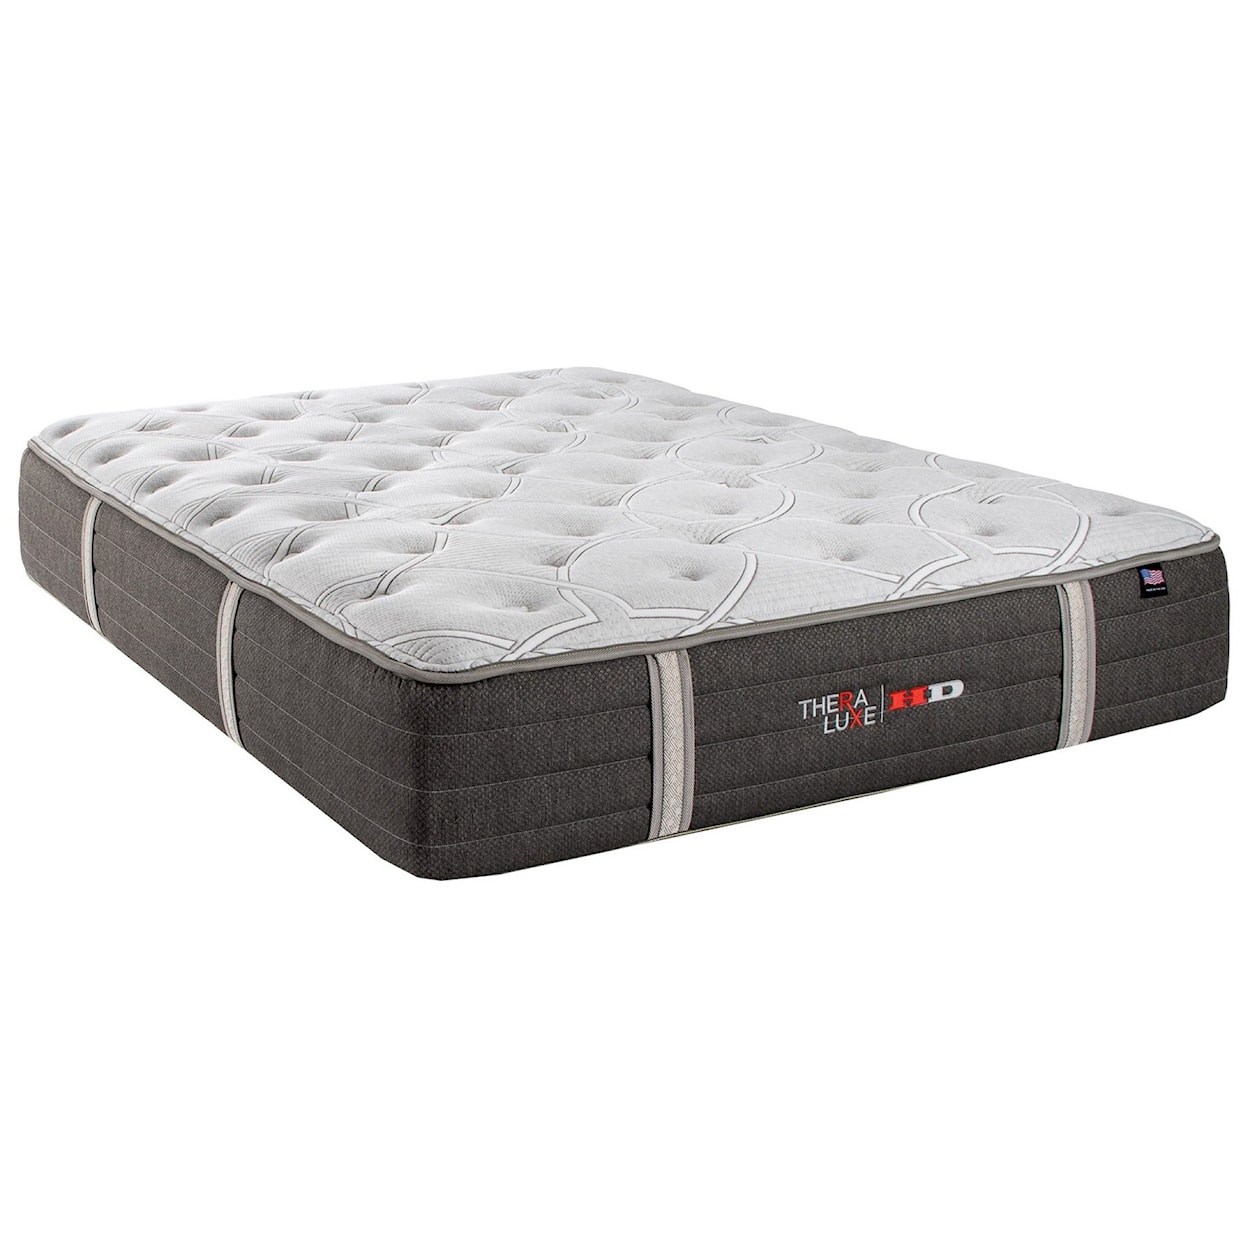 Therapedic Theraluxe Sequoia Twin XL Plush Pocketed Coil Mattress